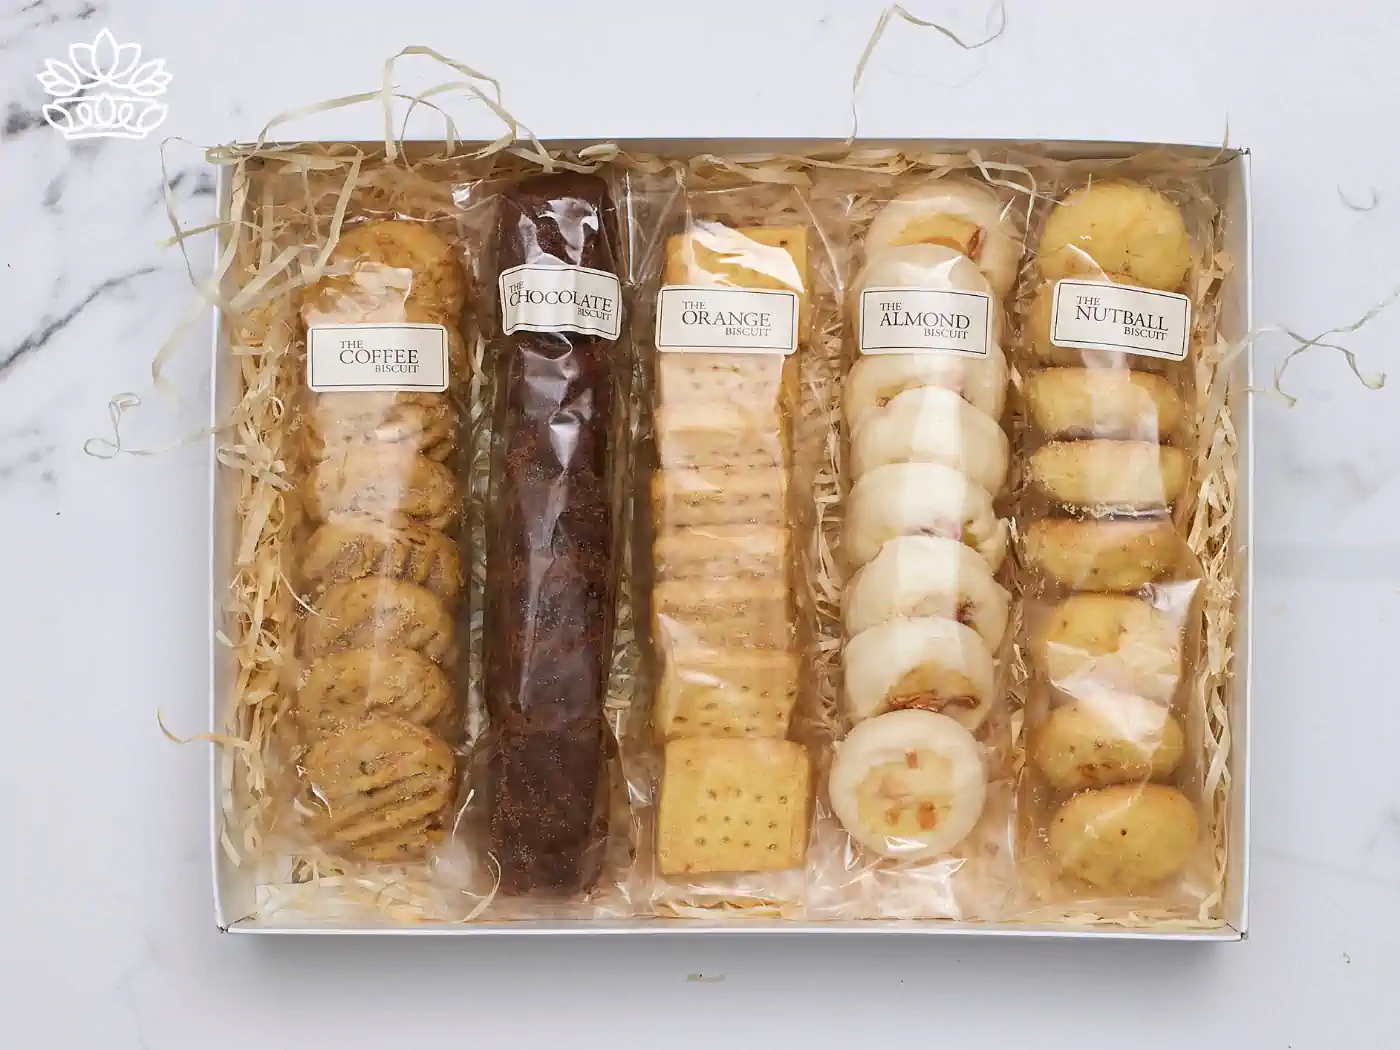 Exquisite selection of gourmet biscuits in a gift box, featuring assorted flavors like coffee, chocolate, orange, almond, and nutball, each neatly labeled and arranged in straw-filled compartments. A delightful treat for any housewarming occasion. Fabulous Flowers and Gifts